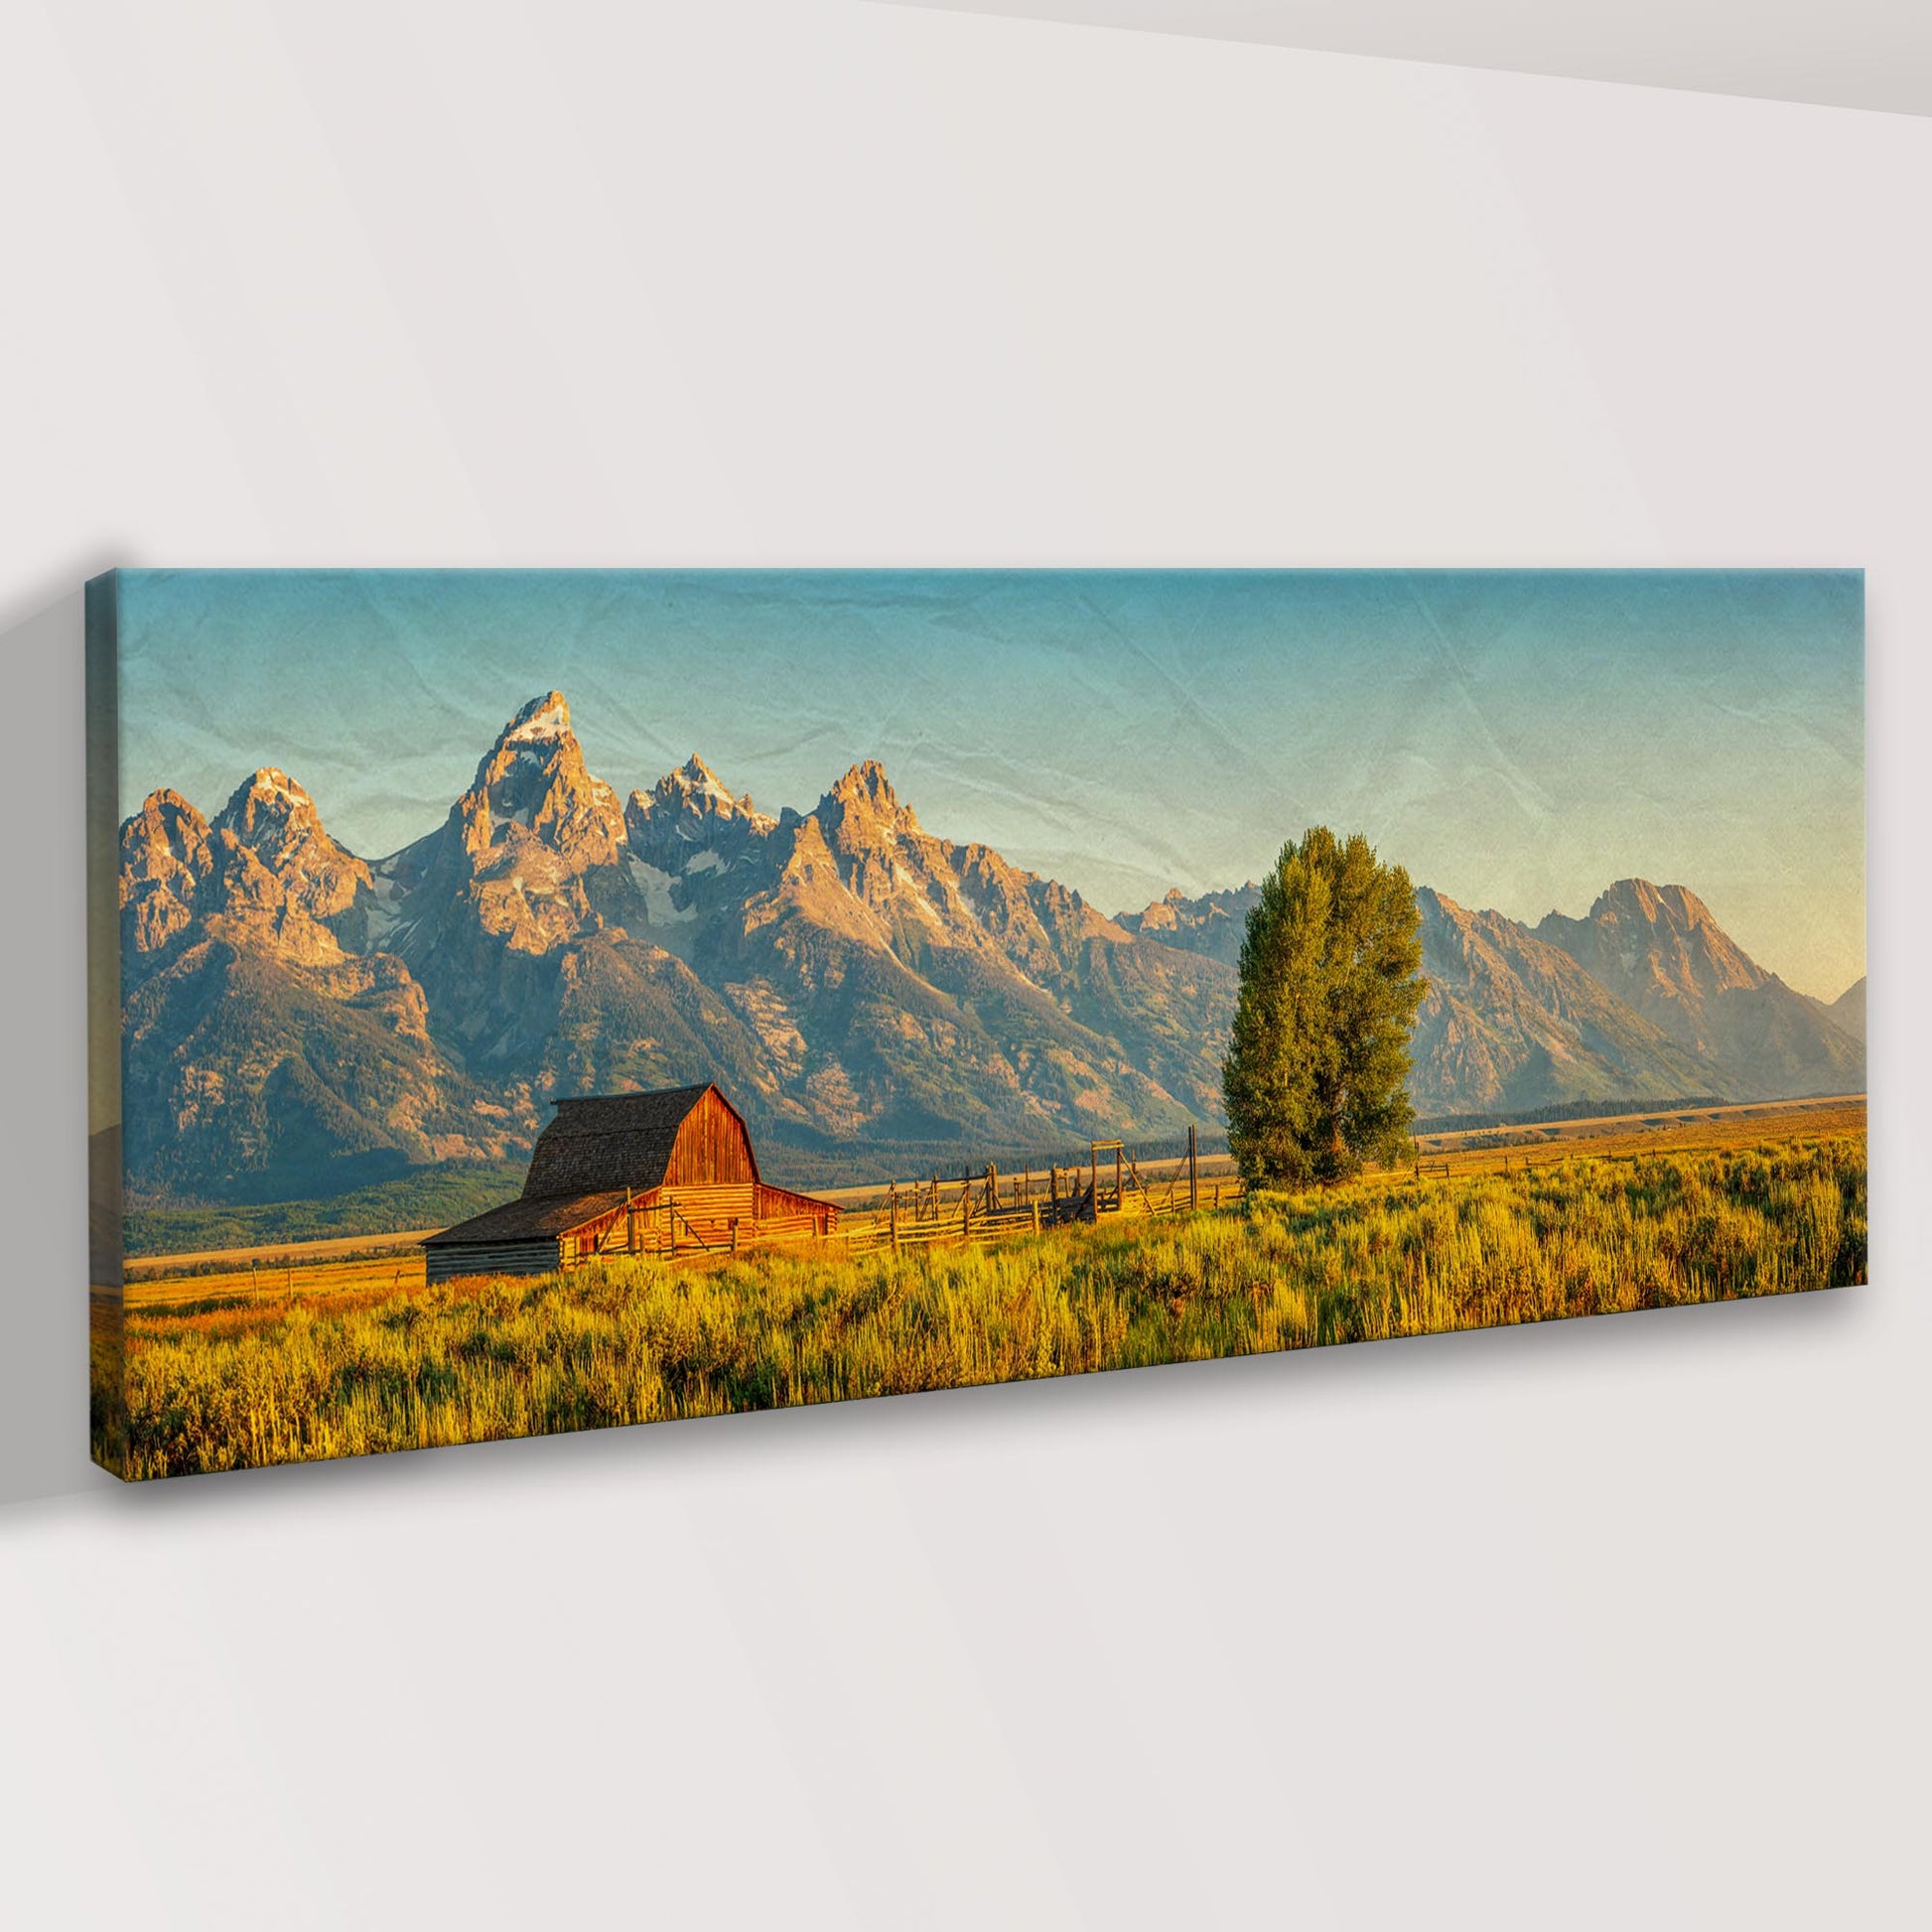 The Wild Frontier Of Grand Teton National Park Canvas Wall Art Style 1 - Image by Tailored Canvases